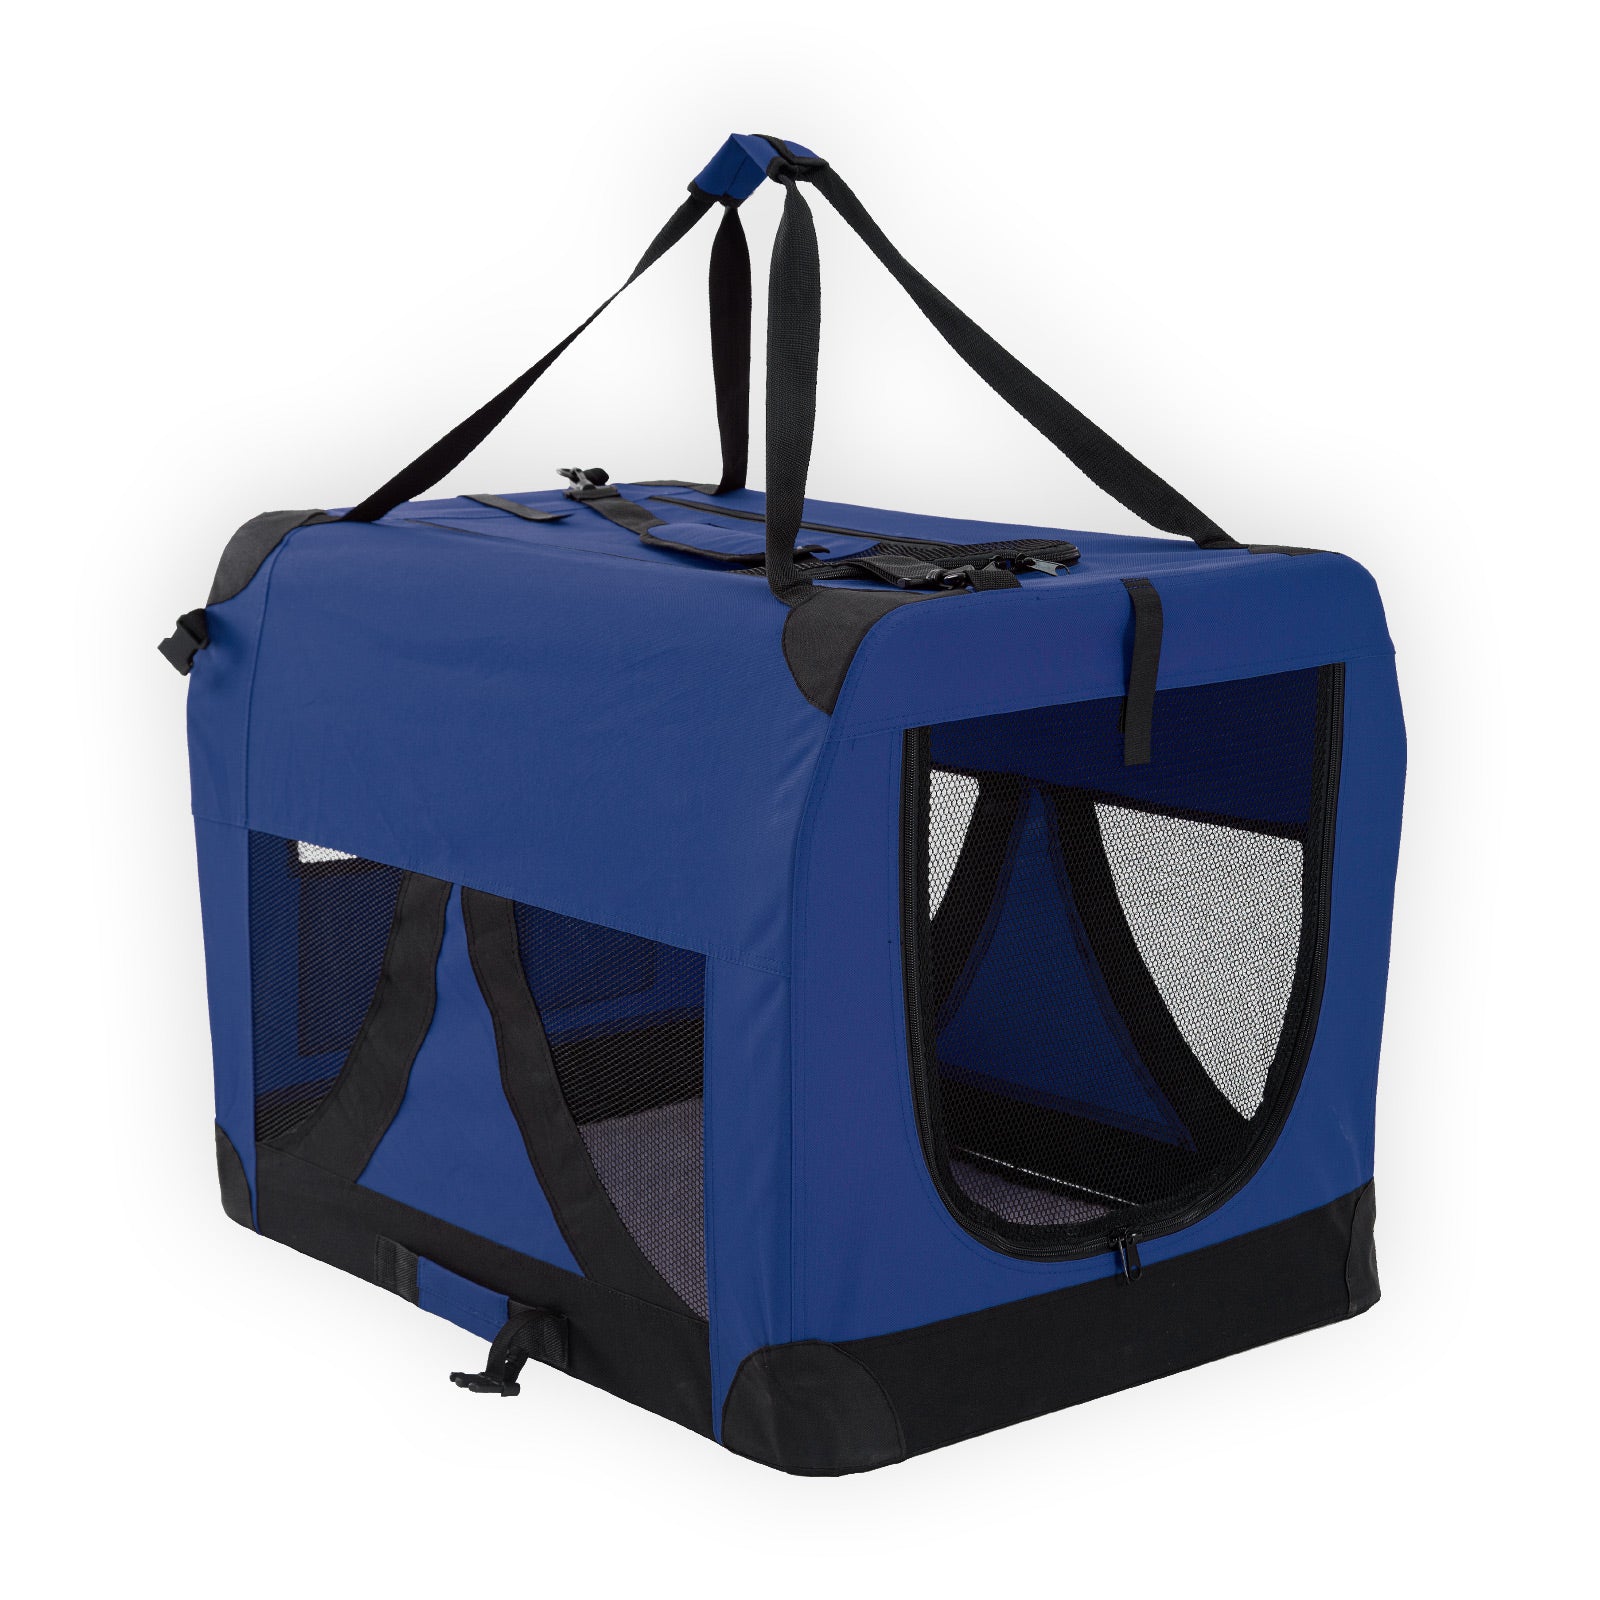 paw-mate-blue-portable-soft-dog-cage-crate-carrier-l